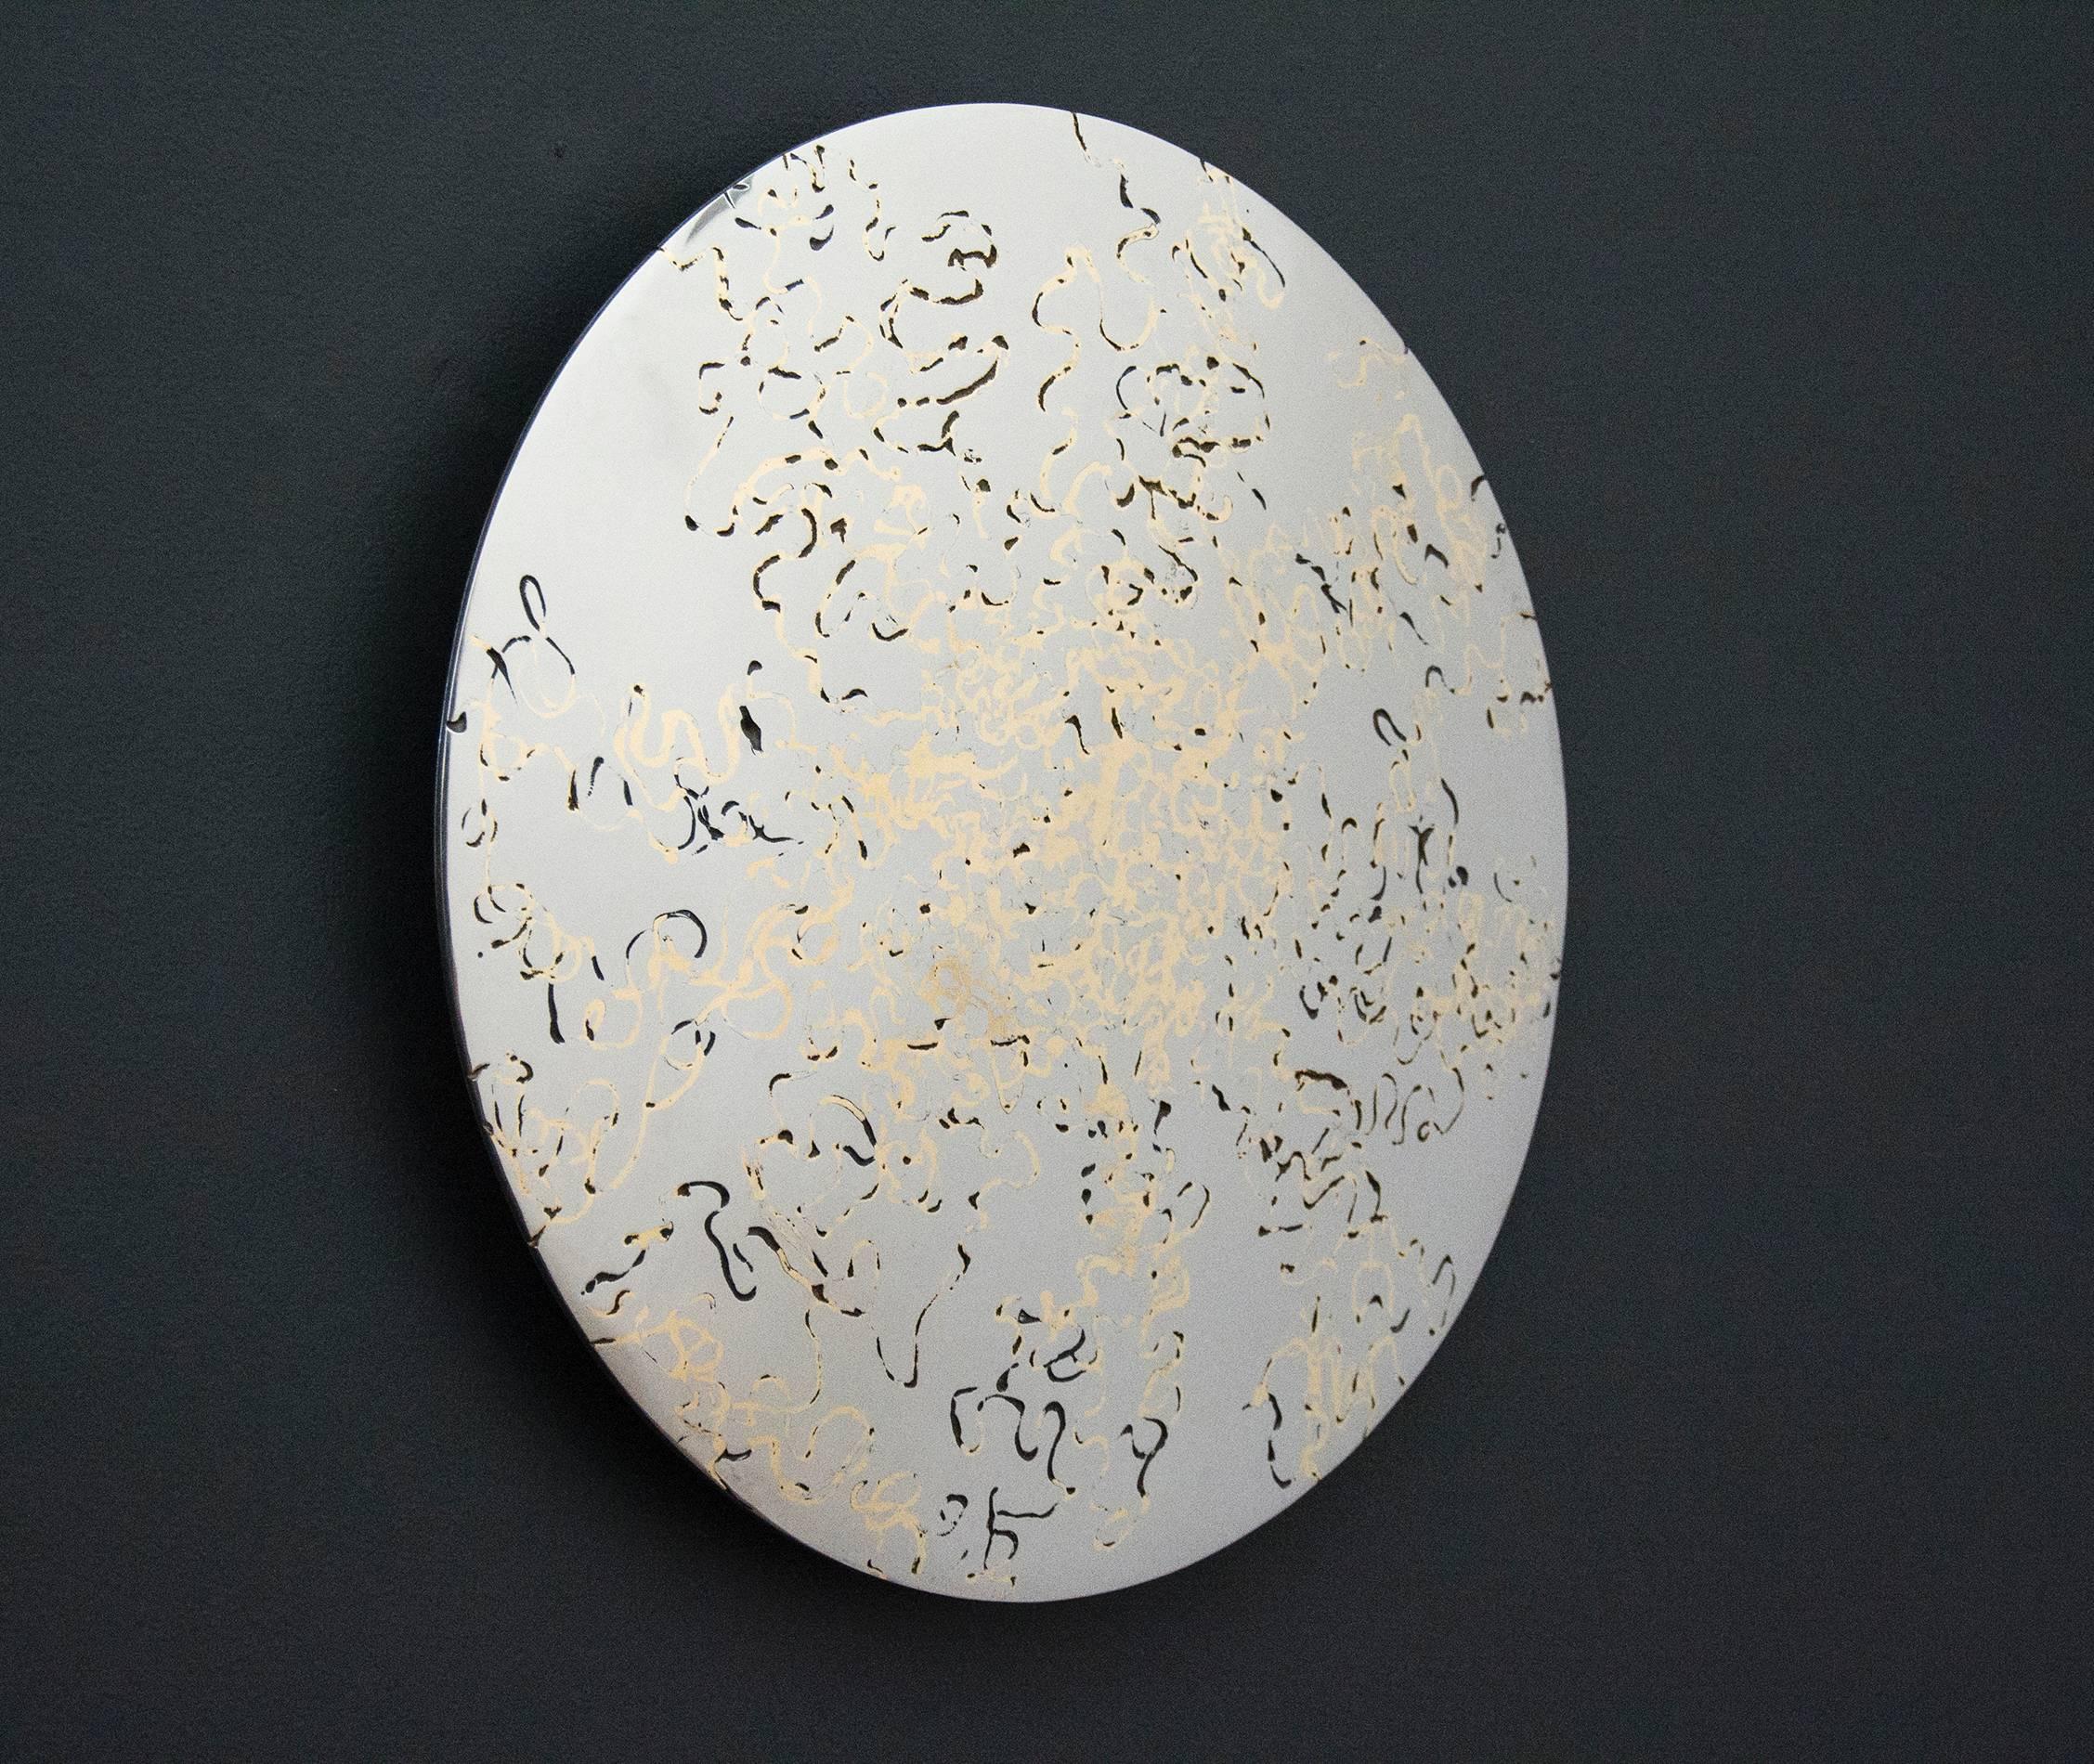 Reflecting Nature Series No 1 - polished stainless steel, copper, wall sculpture